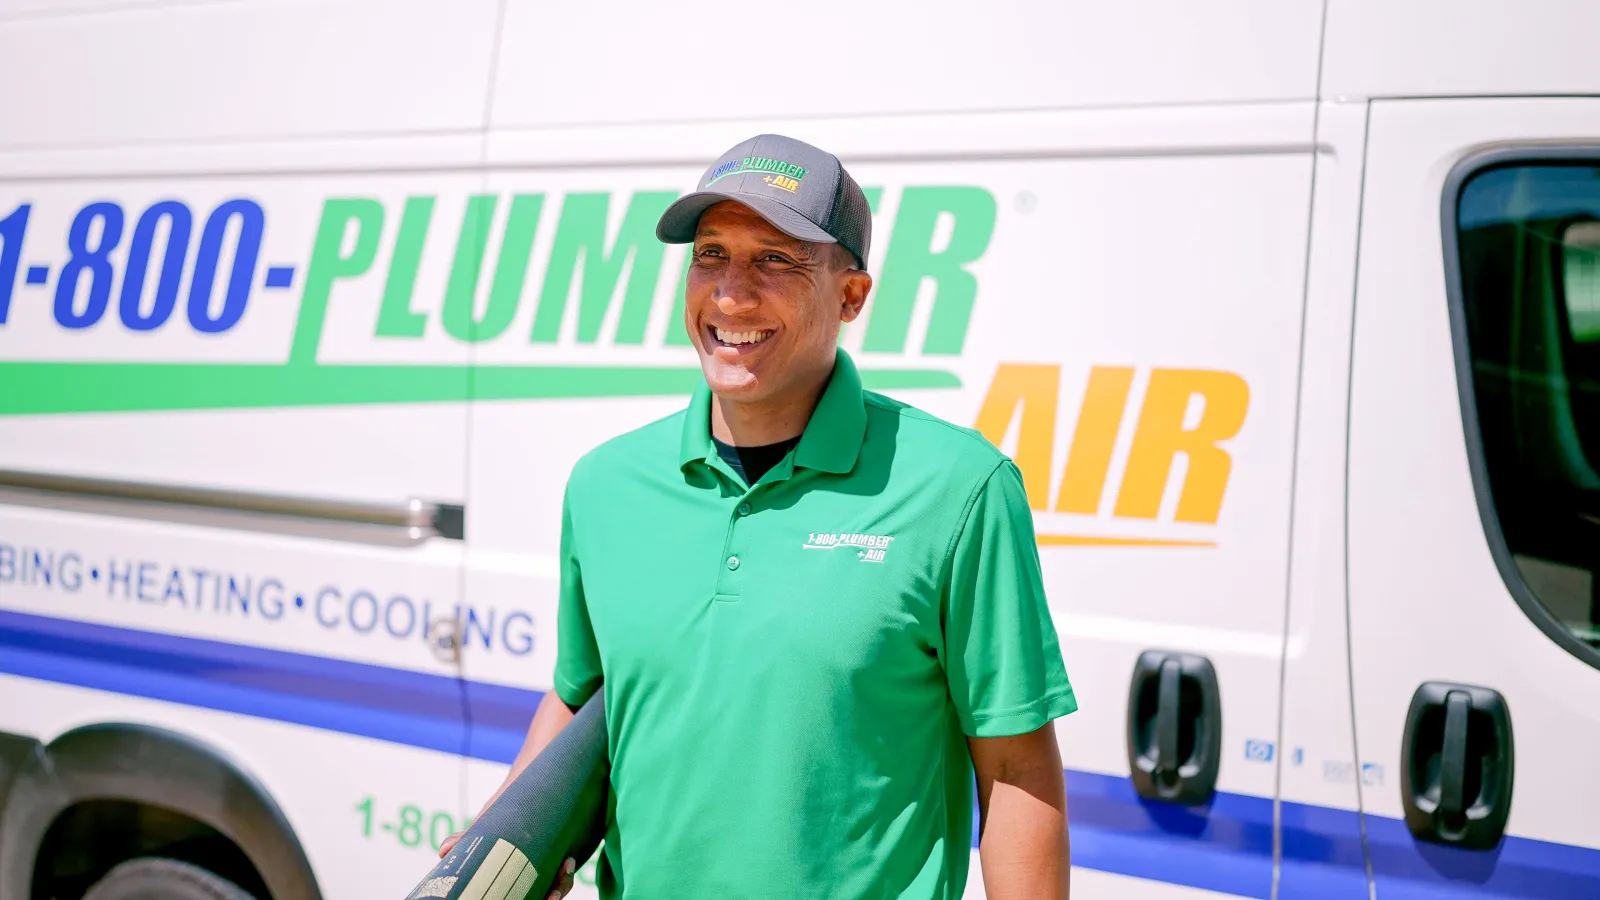 A 1-800-Plumber +Air of Oklahoma City technician and a van